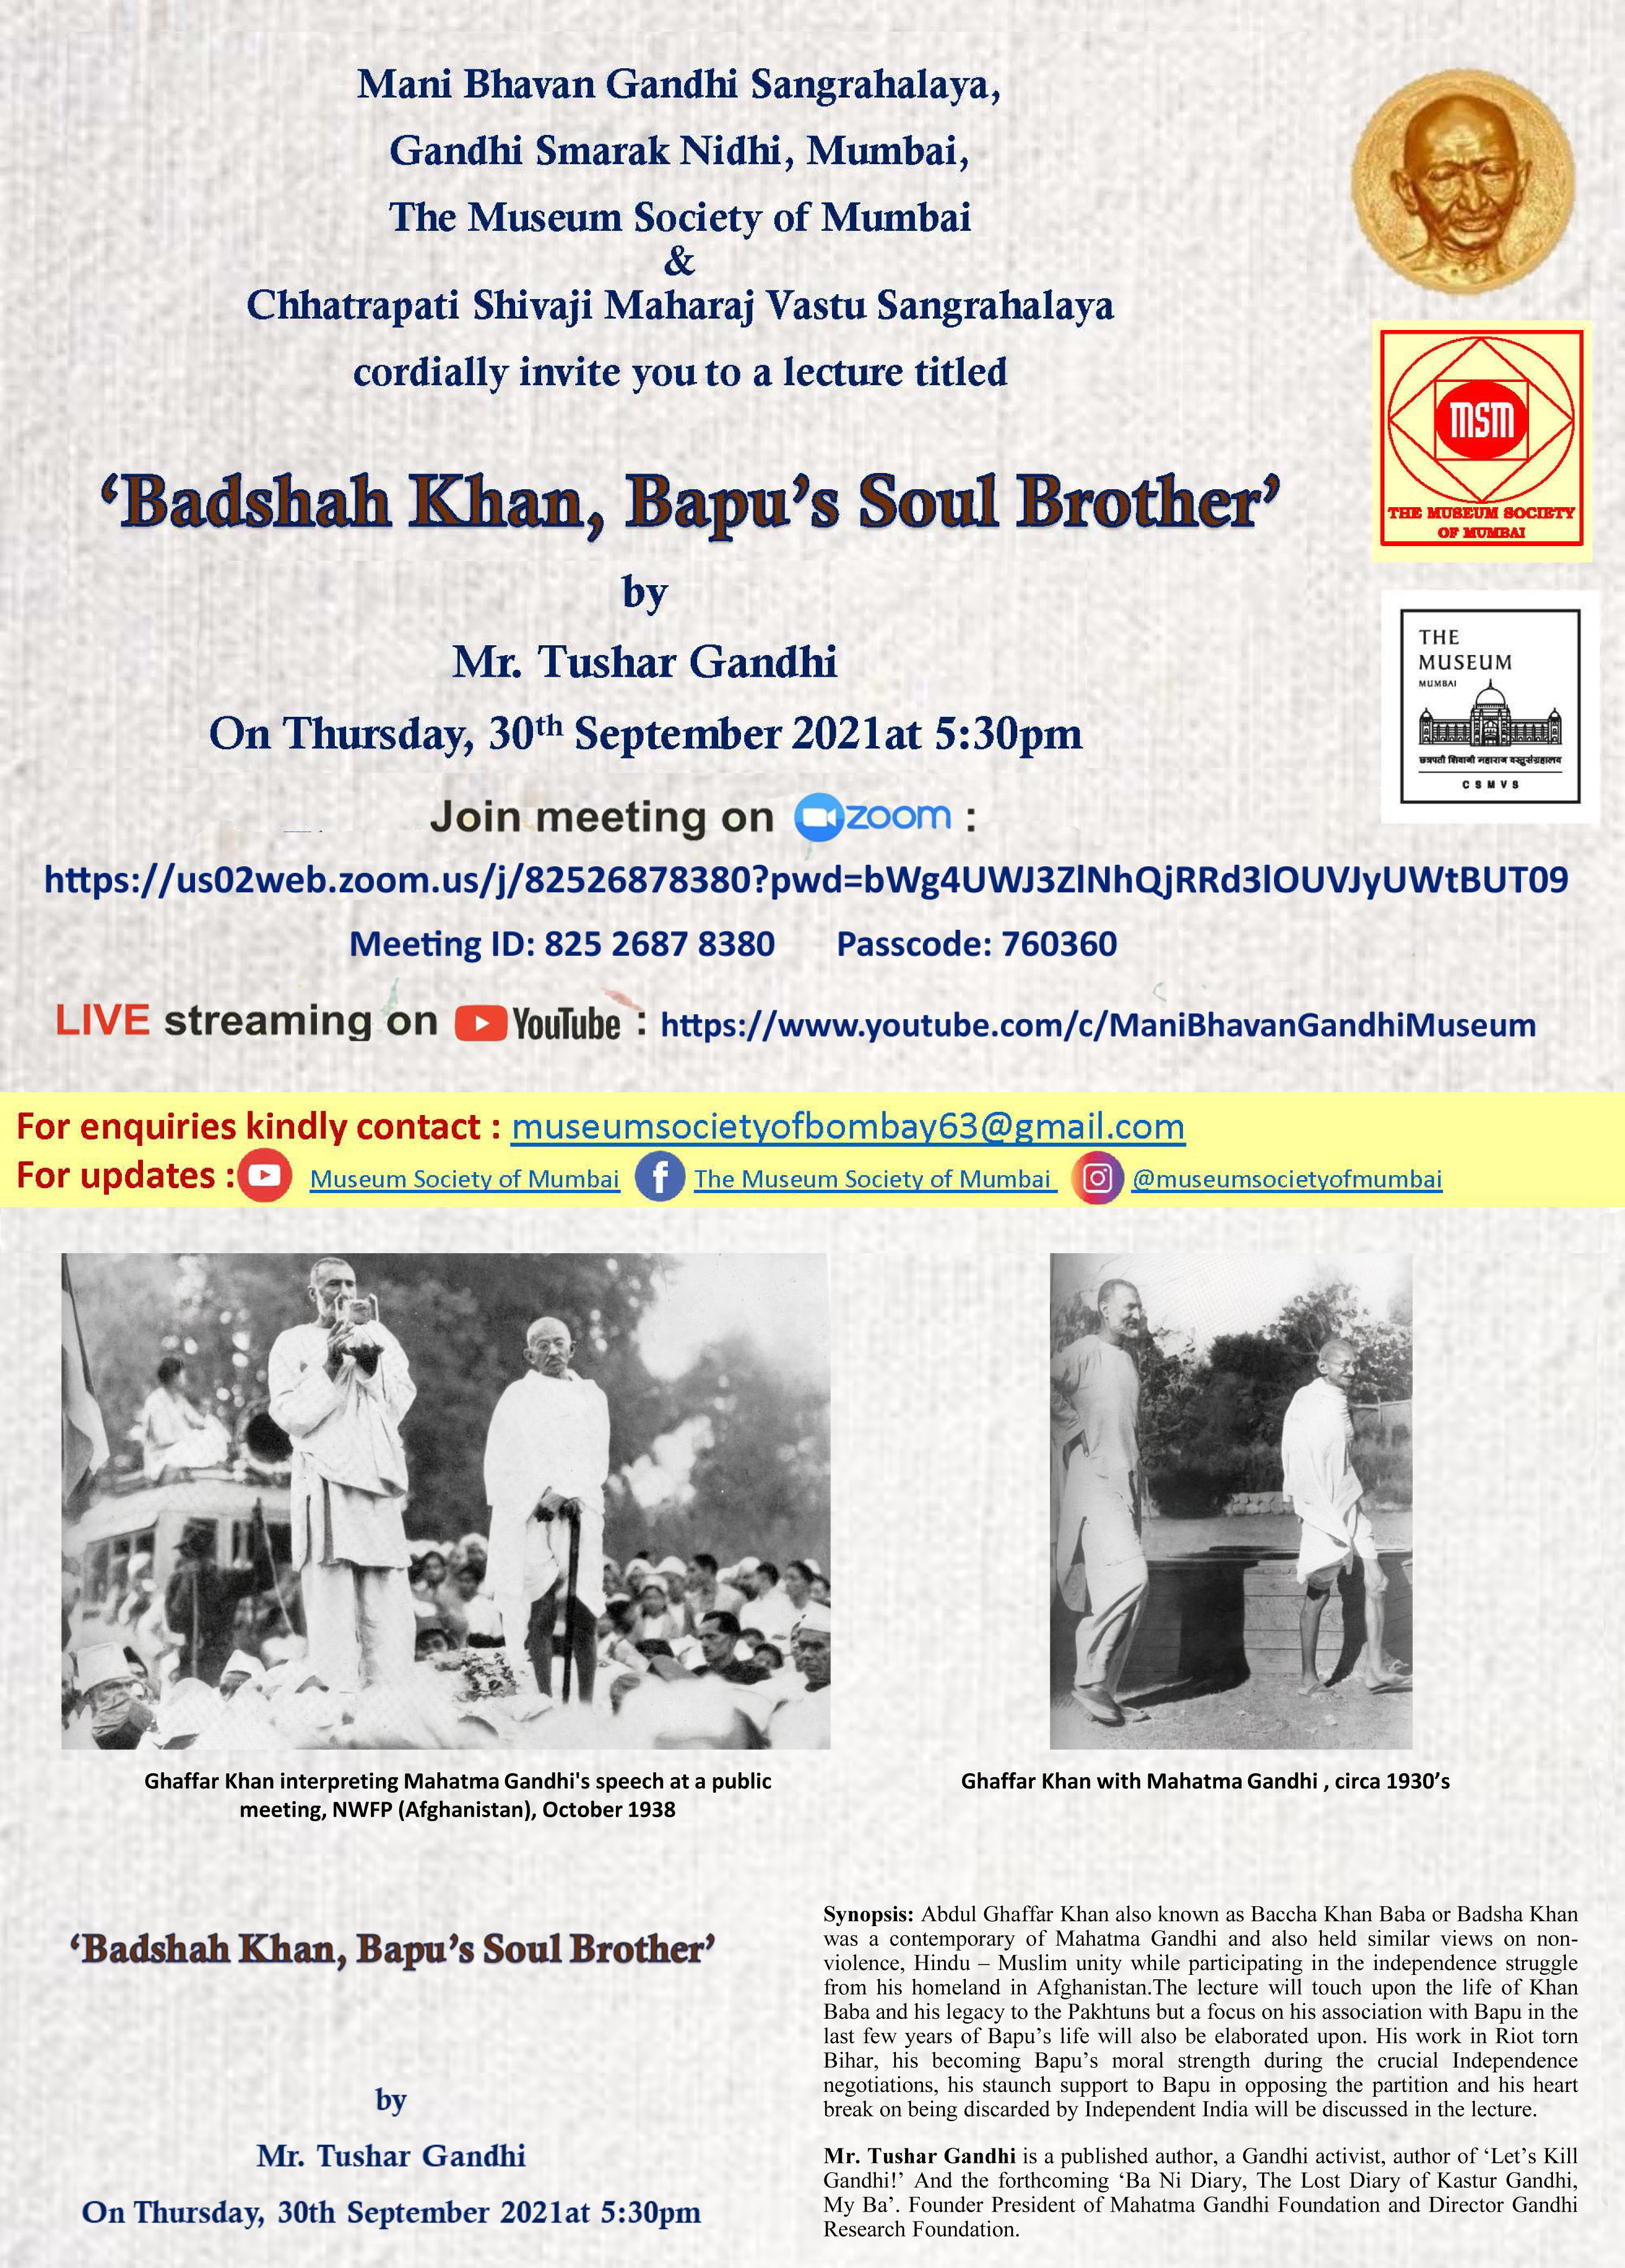 INVITATION FOR A LECTURE BY RAJMOHAN GANDHI